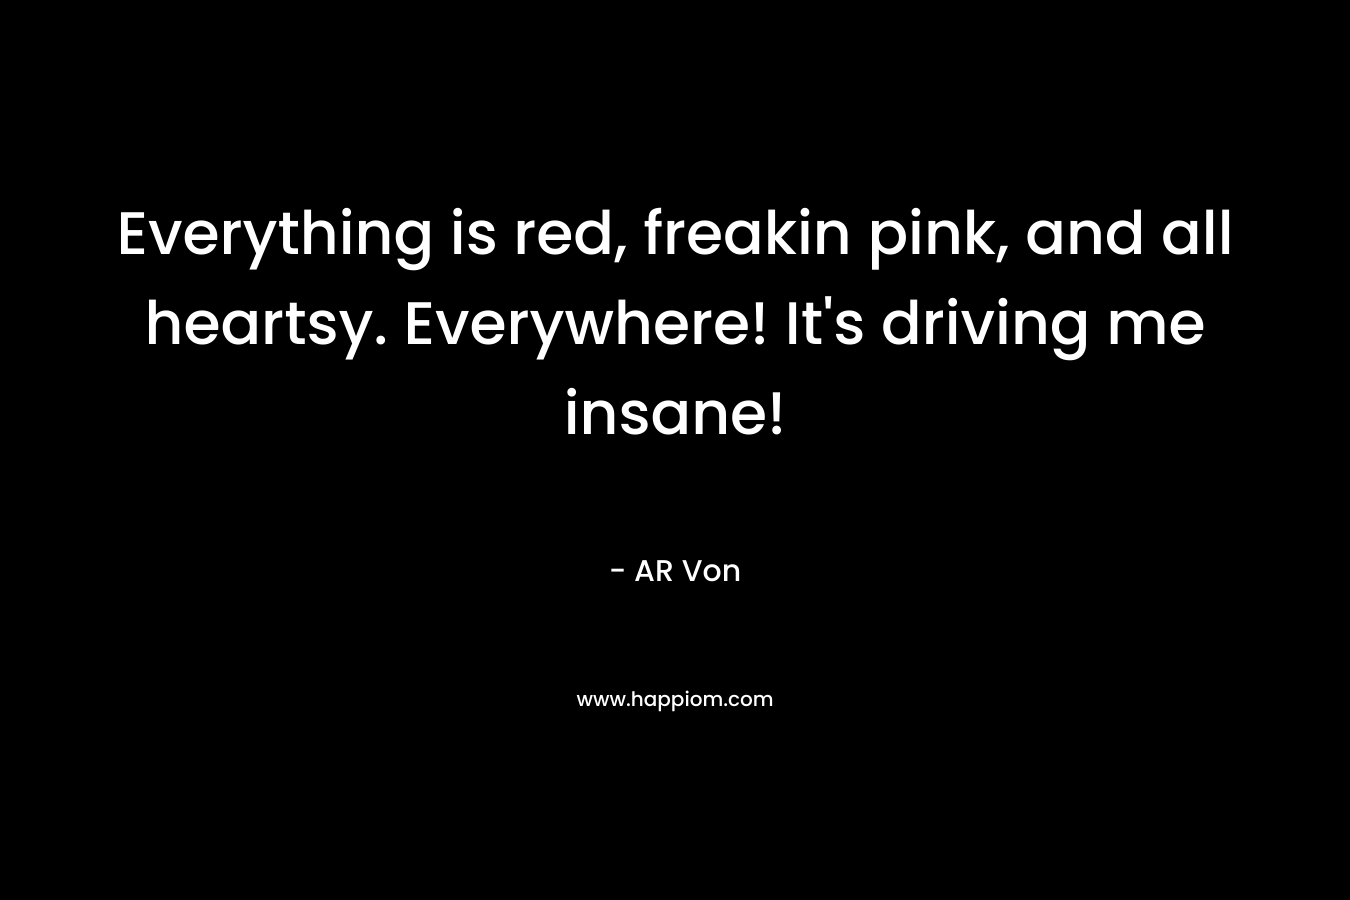 Everything is red, freakin pink, and all heartsy. Everywhere! It's driving me insane!